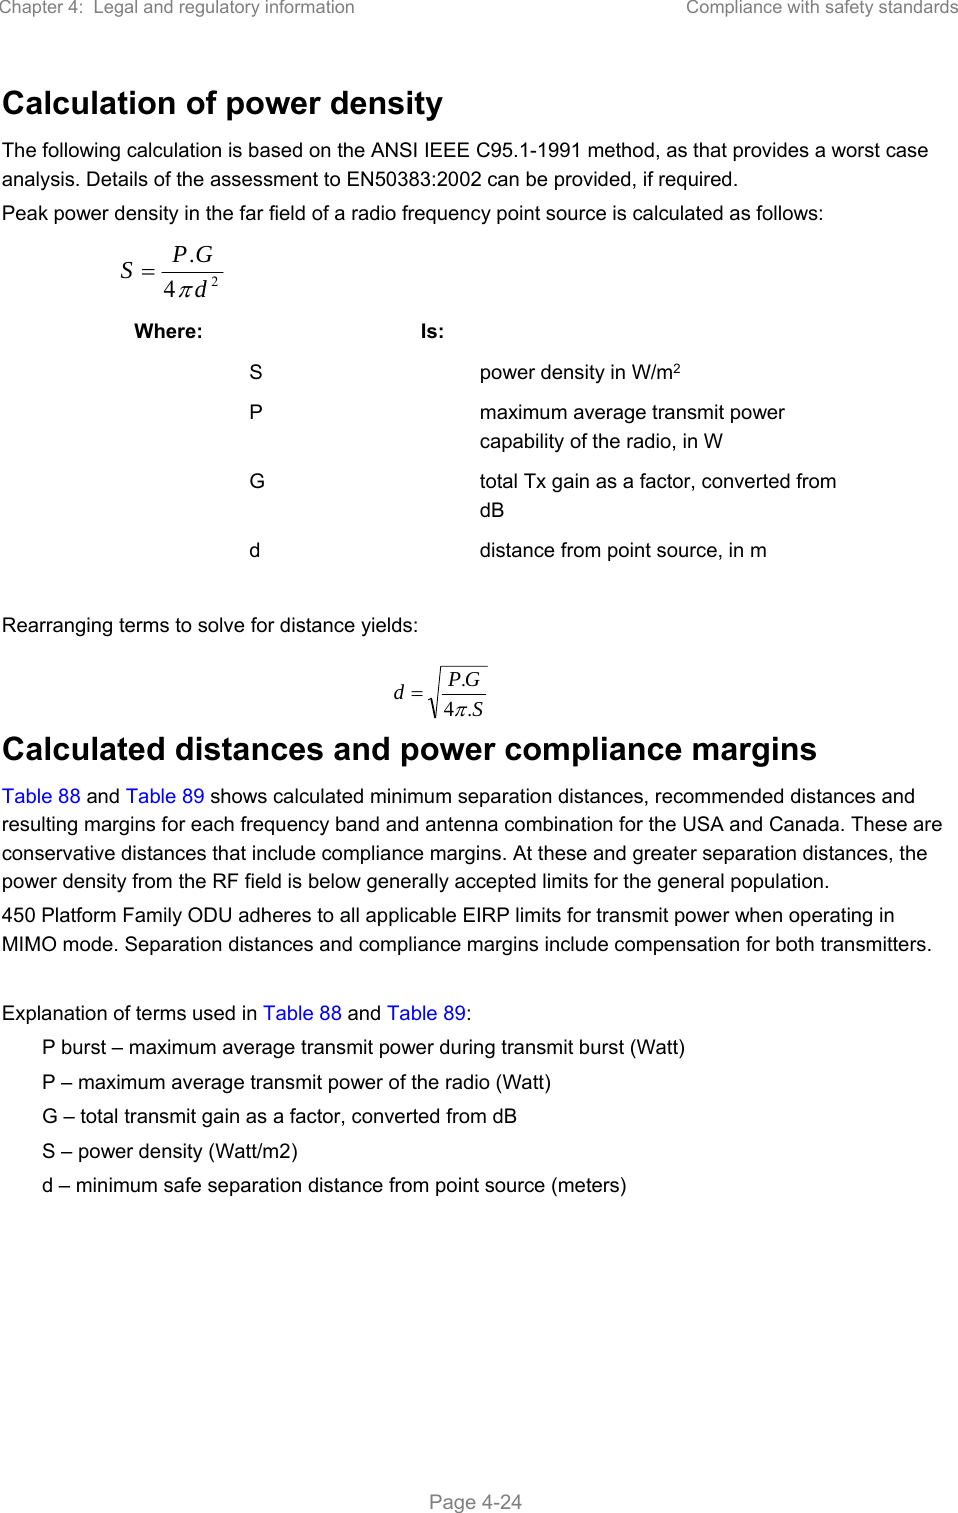 Chapter 4:  Legal and regulatory information  Compliance with safety standards   Page 4-24 Calculation of power density The following calculation is based on the ANSI IEEE C95.1-1991 method, as that provides a worst case analysis. Details of the assessment to EN50383:2002 can be provided, if required. Peak power density in the far field of a radio frequency point source is calculated as follows:   Where:   Is:     S    power density in W/m2   P    maximum average transmit power capability of the radio, in W   G    total Tx gain as a factor, converted from dB   d    distance from point source, in m  Rearranging terms to solve for distance yields:   Calculated distances and power compliance margins Table 88 and Table 89 shows calculated minimum separation distances, recommended distances and resulting margins for each frequency band and antenna combination for the USA and Canada. These are conservative distances that include compliance margins. At these and greater separation distances, the power density from the RF field is below generally accepted limits for the general population. 450 Platform Family ODU adheres to all applicable EIRP limits for transmit power when operating in MIMO mode. Separation distances and compliance margins include compensation for both transmitters.  Explanation of terms used in Table 88 and Table 89: P burst – maximum average transmit power during transmit burst (Watt) P – maximum average transmit power of the radio (Watt) G – total transmit gain as a factor, converted from dB S – power density (Watt/m2) d – minimum safe separation distance from point source (meters)  24.dGPSSGPd.4.